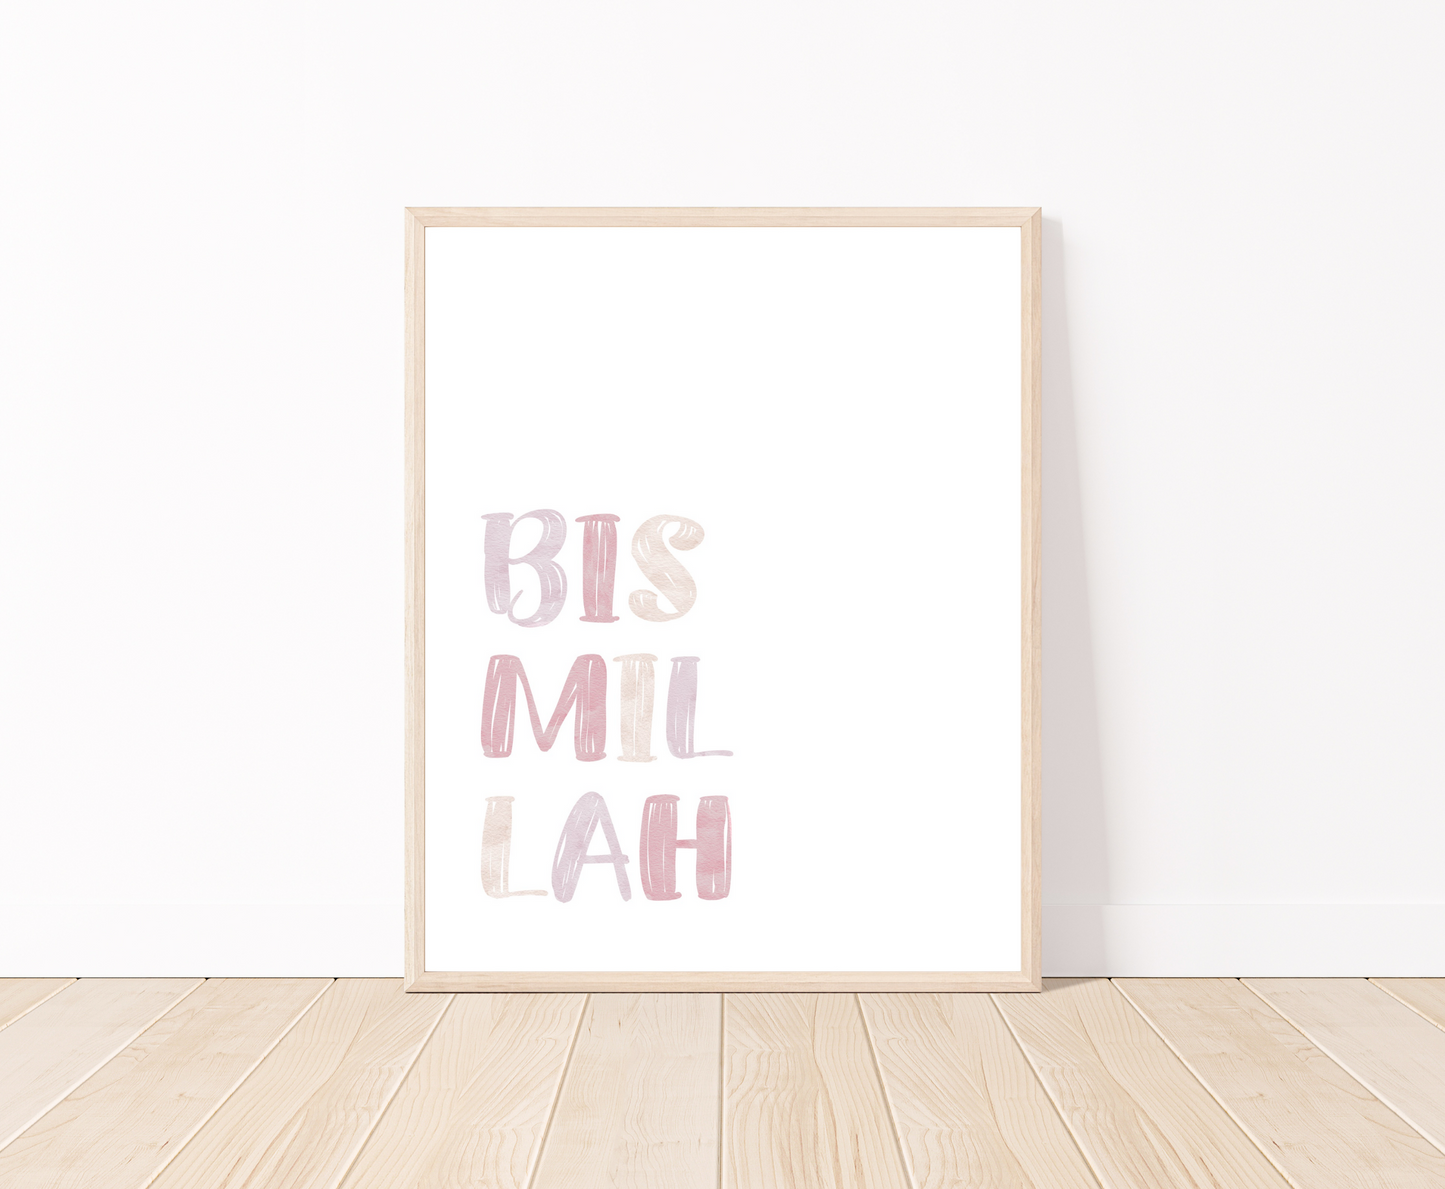 A little girl’s room digital print is placed on a white wall and parquet flooring. It includes “Bismillah” written in multi-colored letters with a white background.